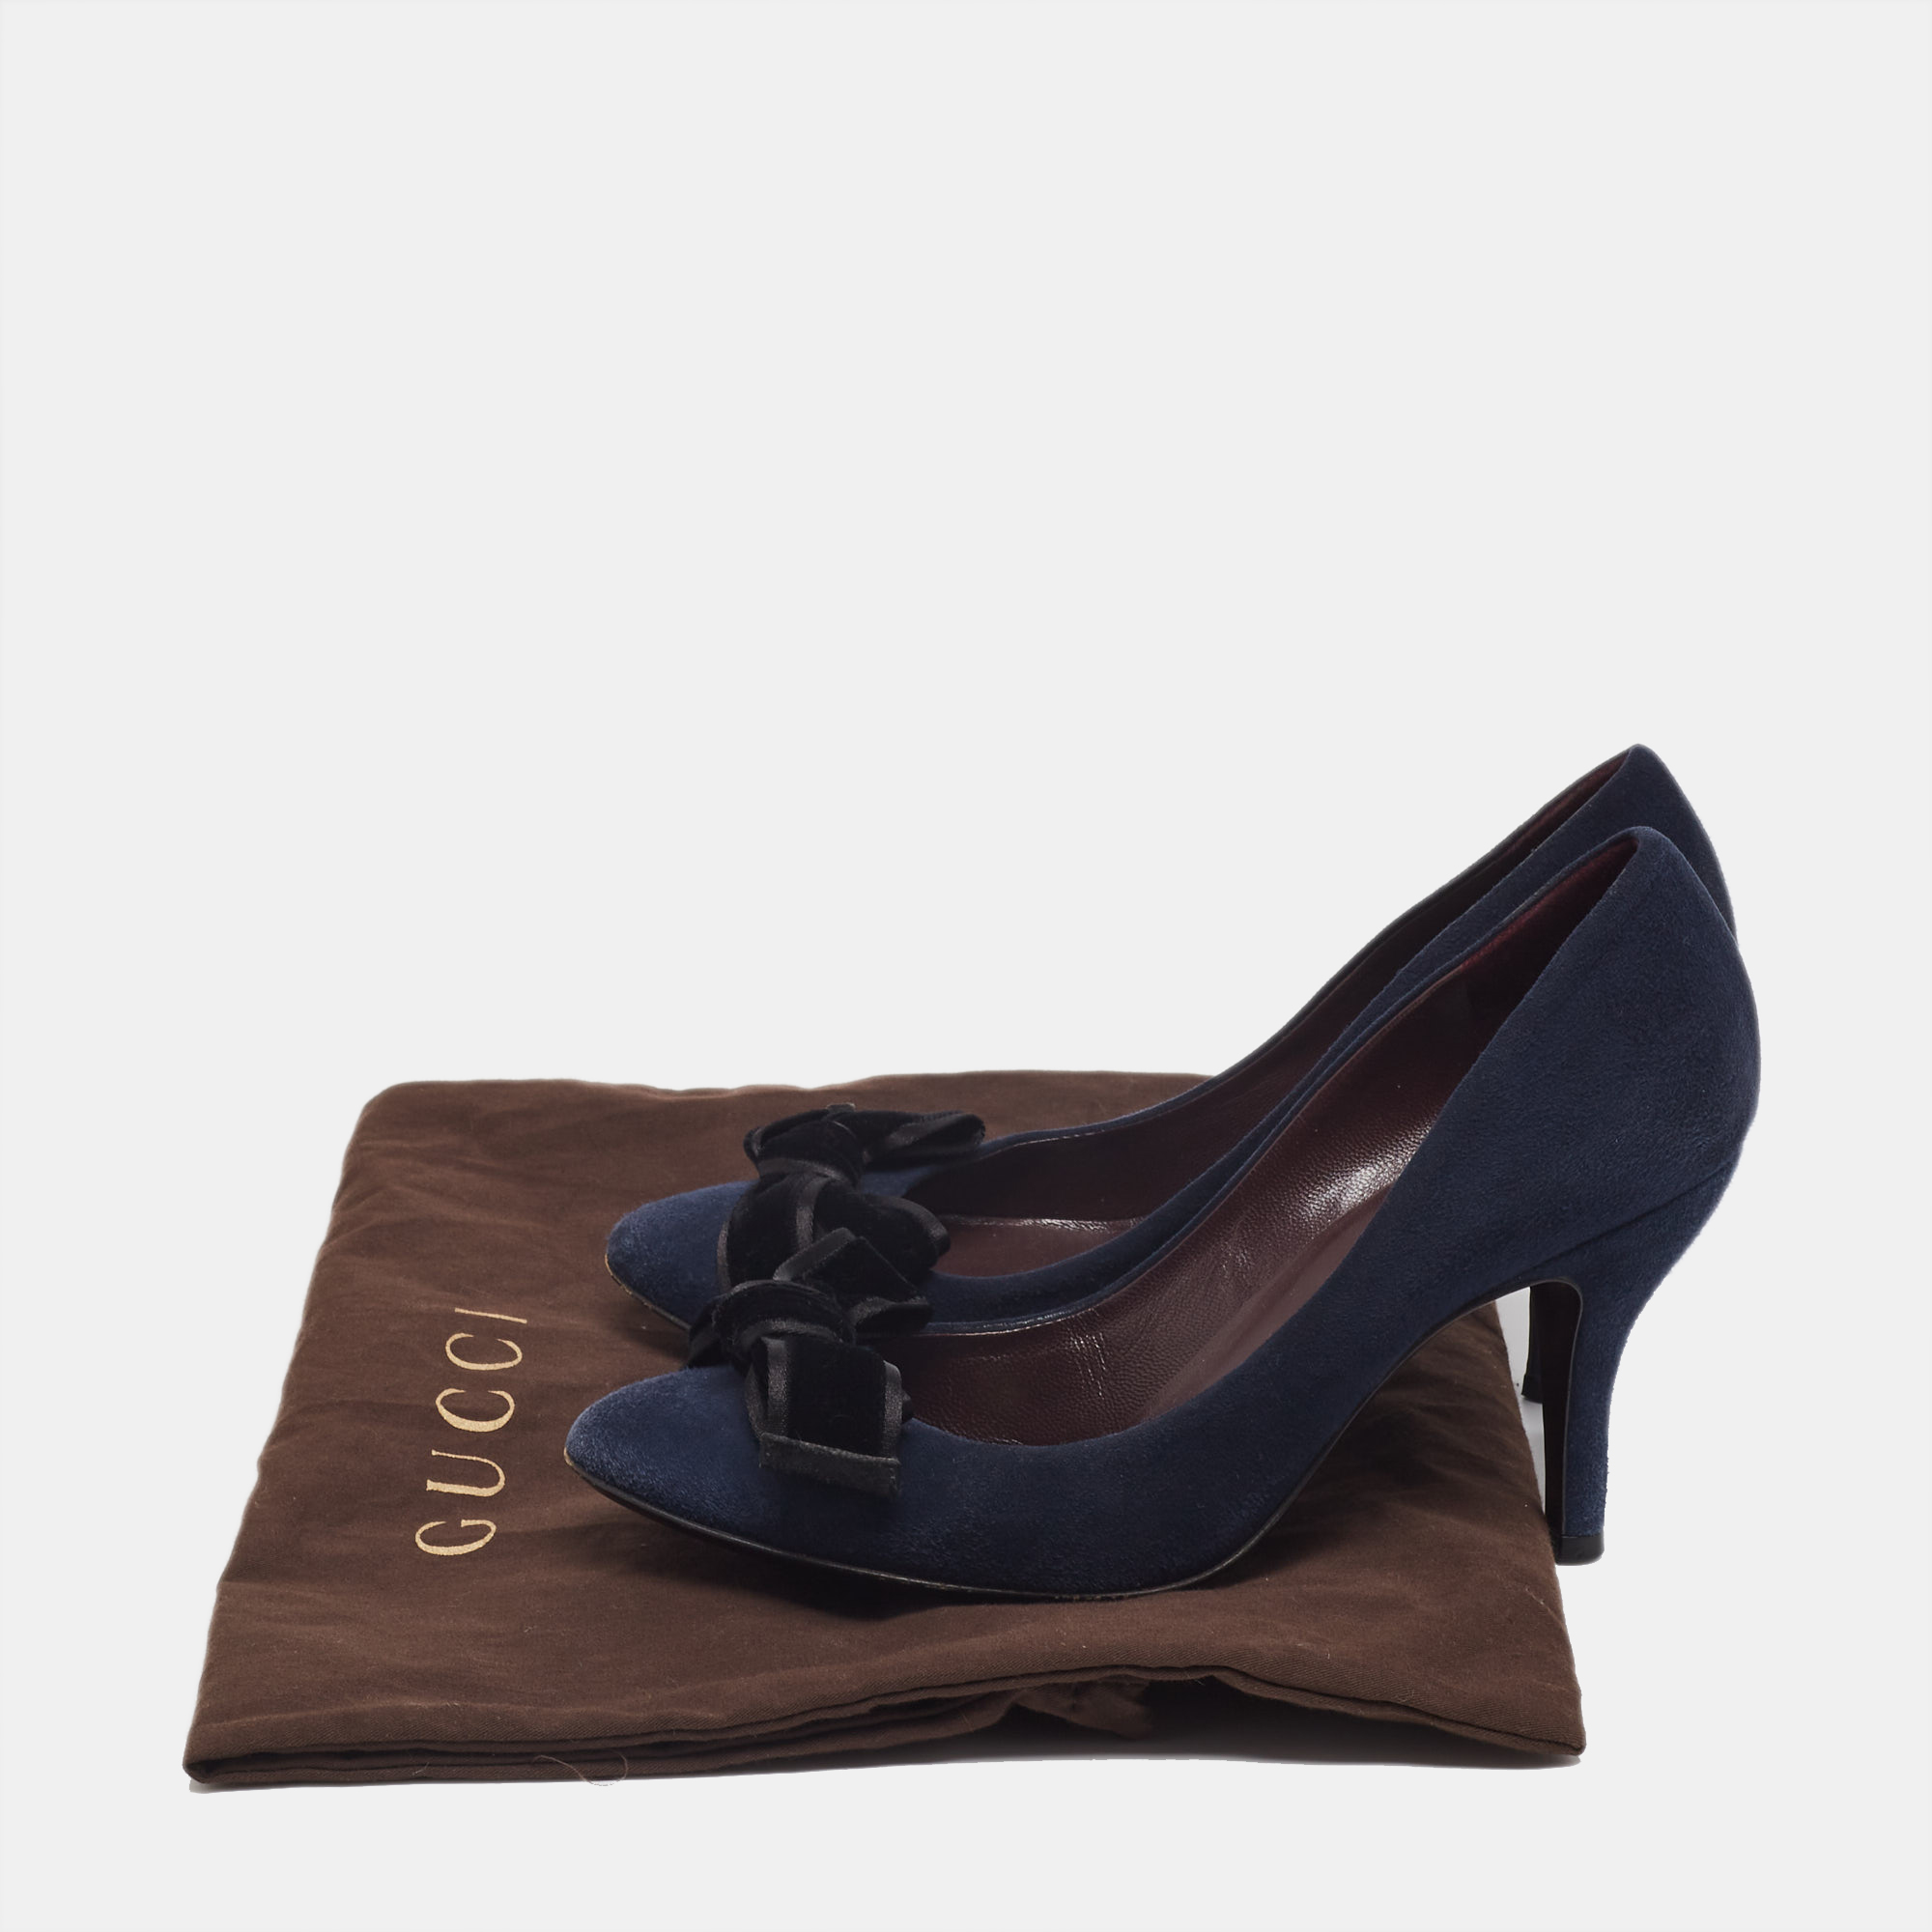 Gucci Navy Blue Suede Bow Round Toe Pumps Size 36.5